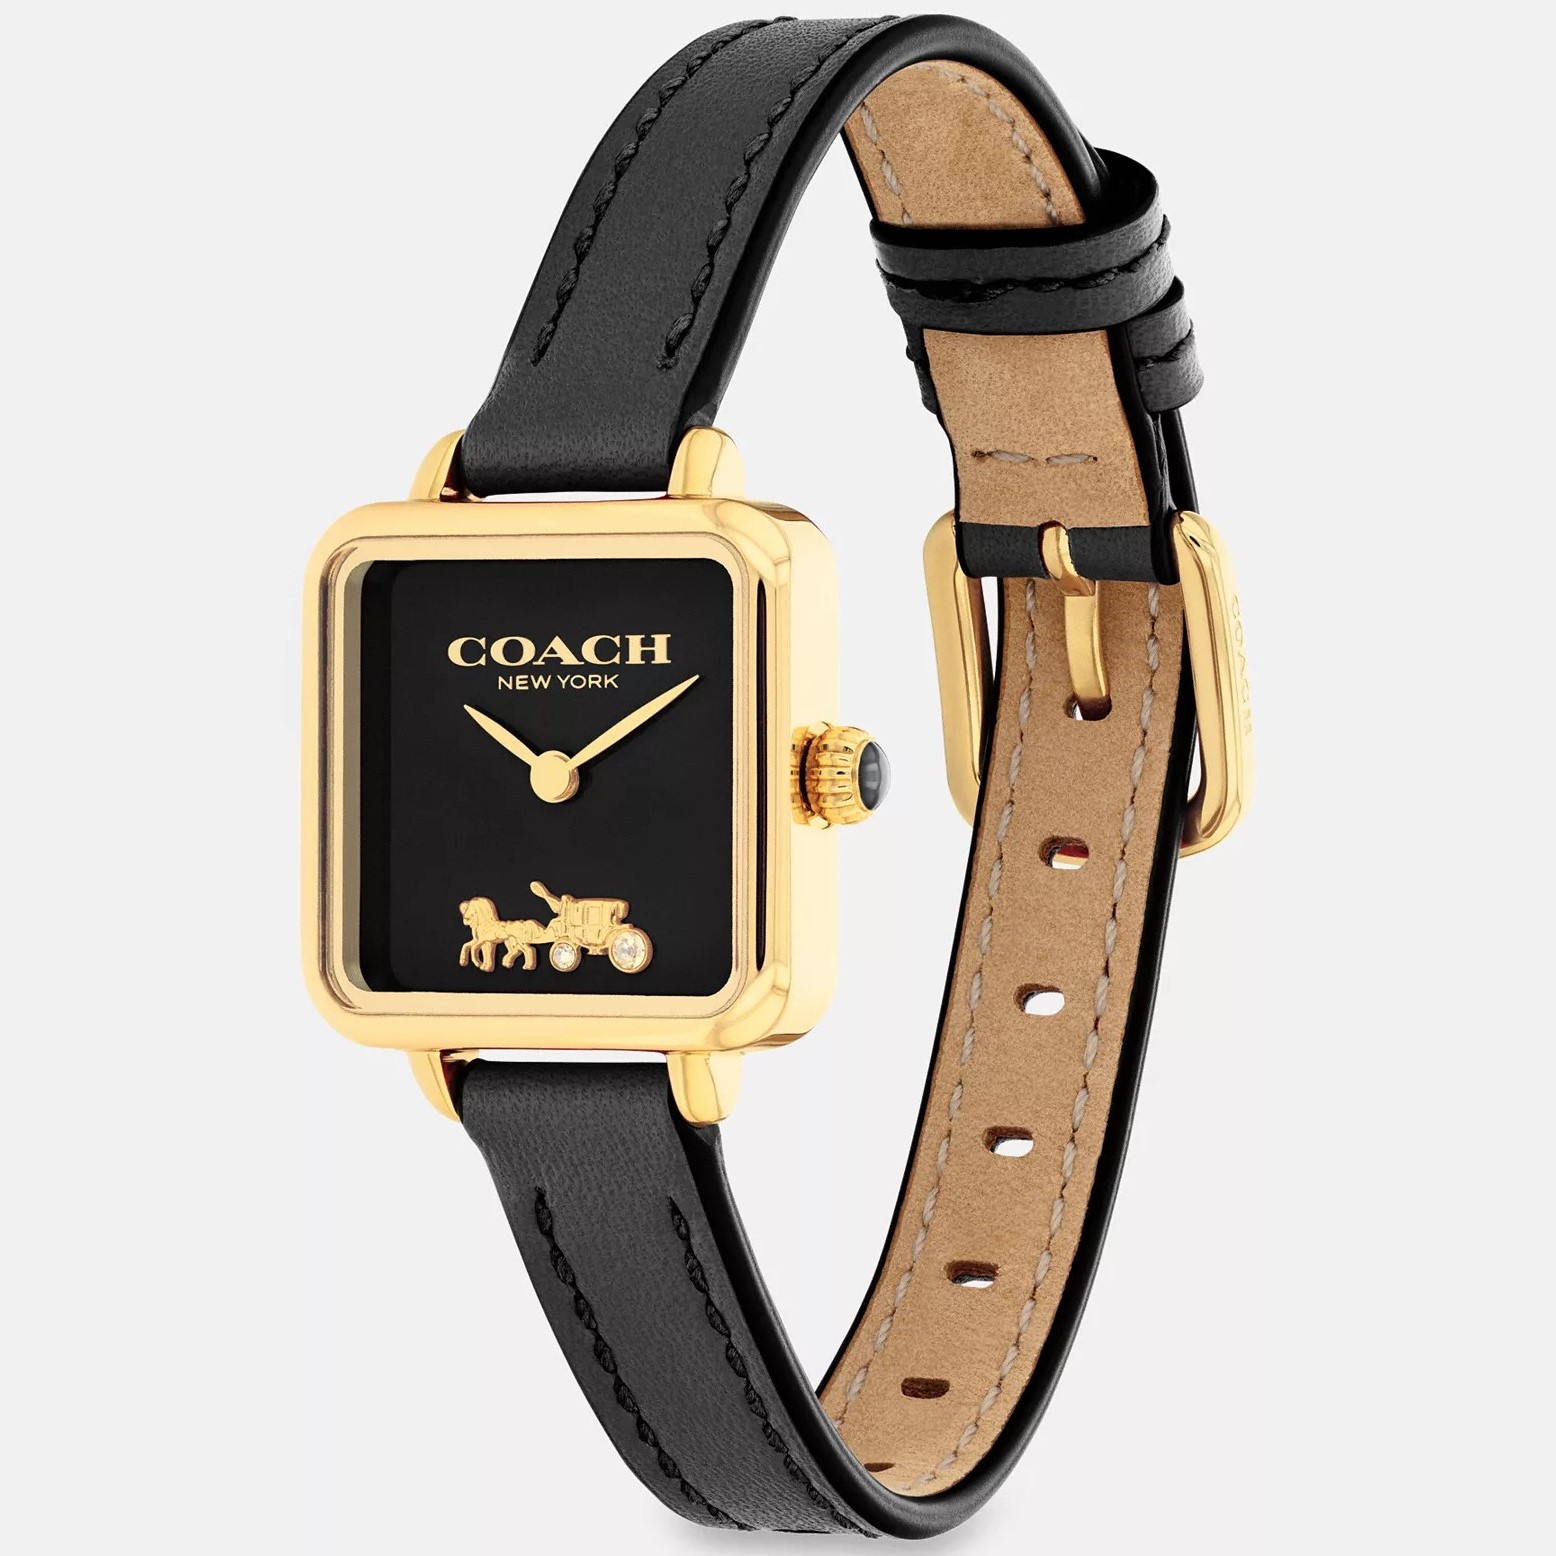 ĐỒNG HỒ NỮ DÂY DA ĐEN COACH CASS SIGNATURE HORSE AND CARRIAGE ION-PLATED GOLDTONE STEEL AND BLACK LEATHER STRAP WATCH 14504225 1